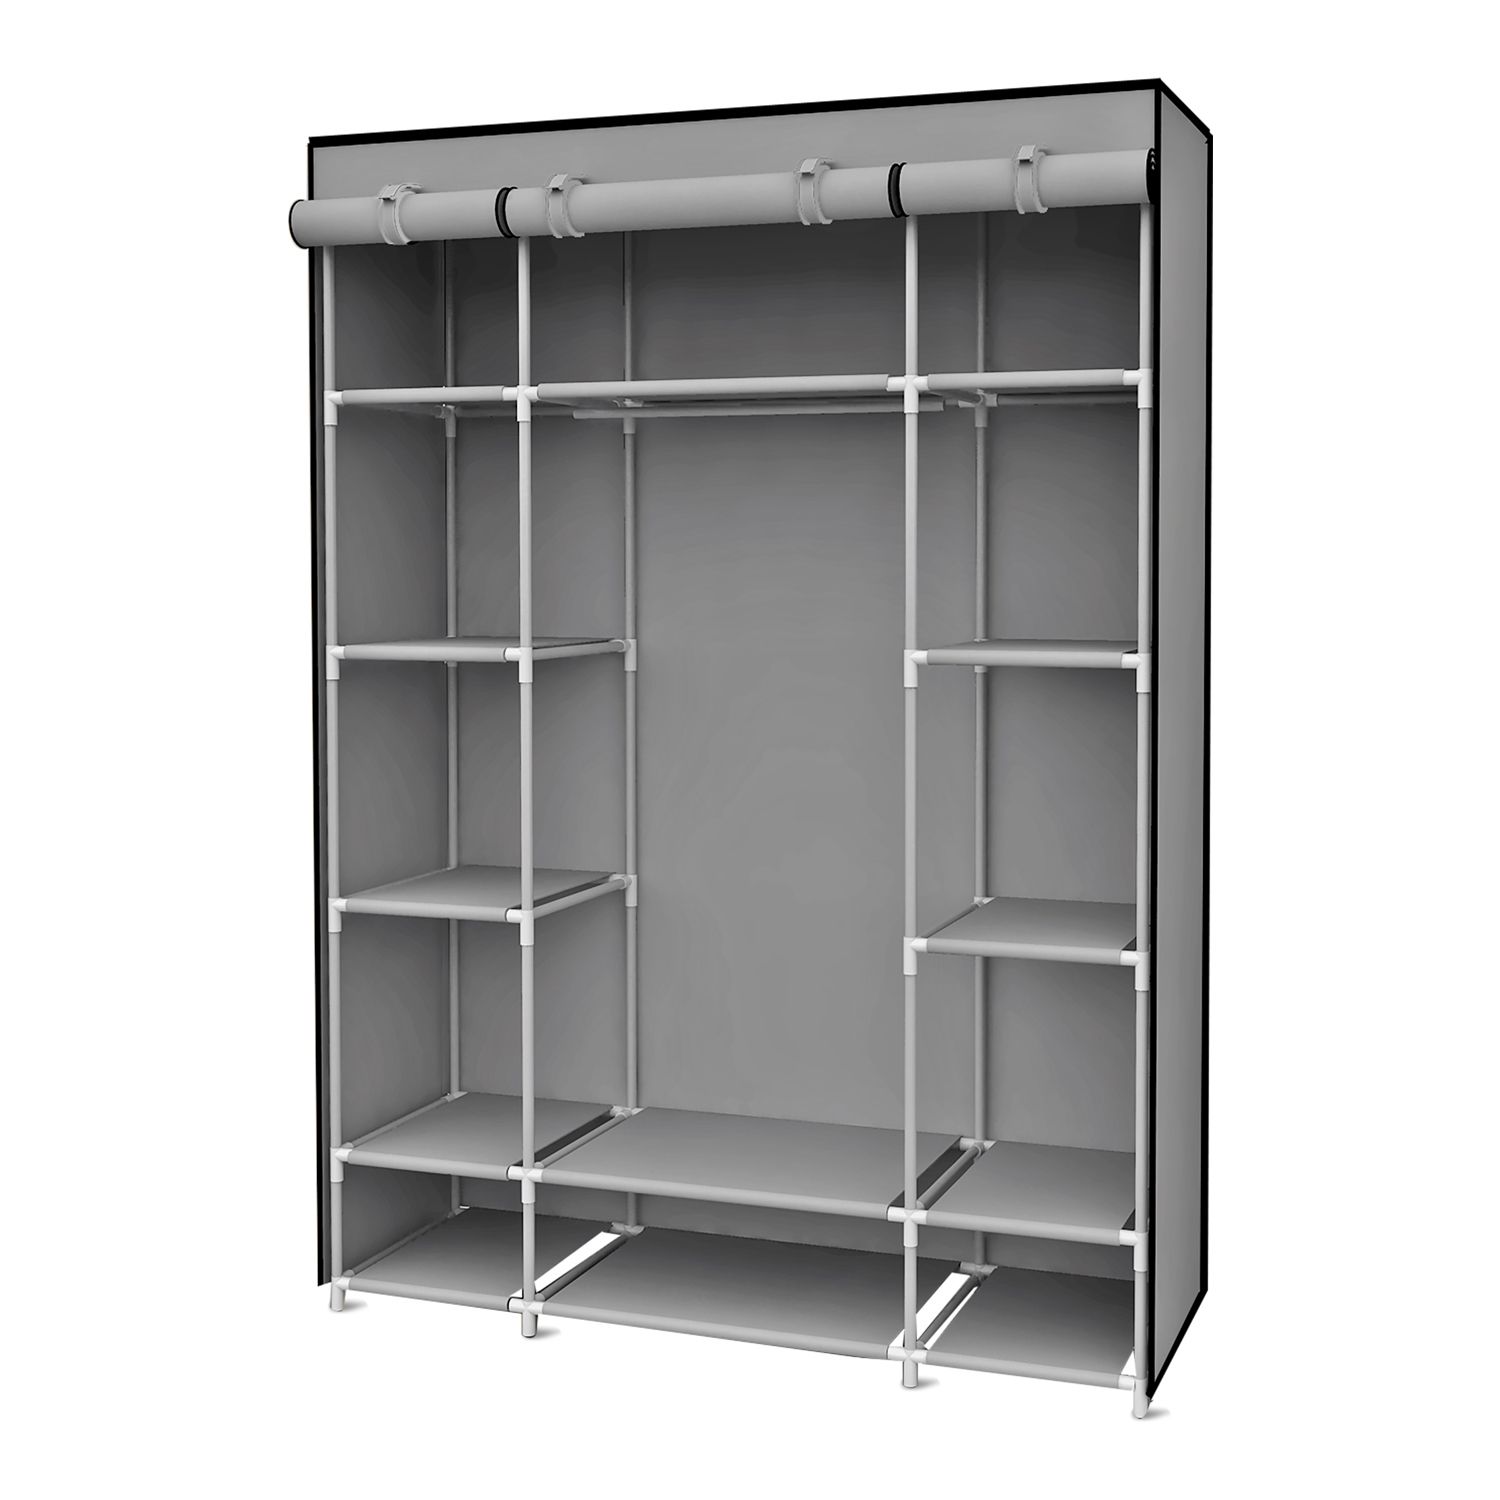 Image for Home Basics Non-Woven Free-Standing Storage Closet at Kohl's.